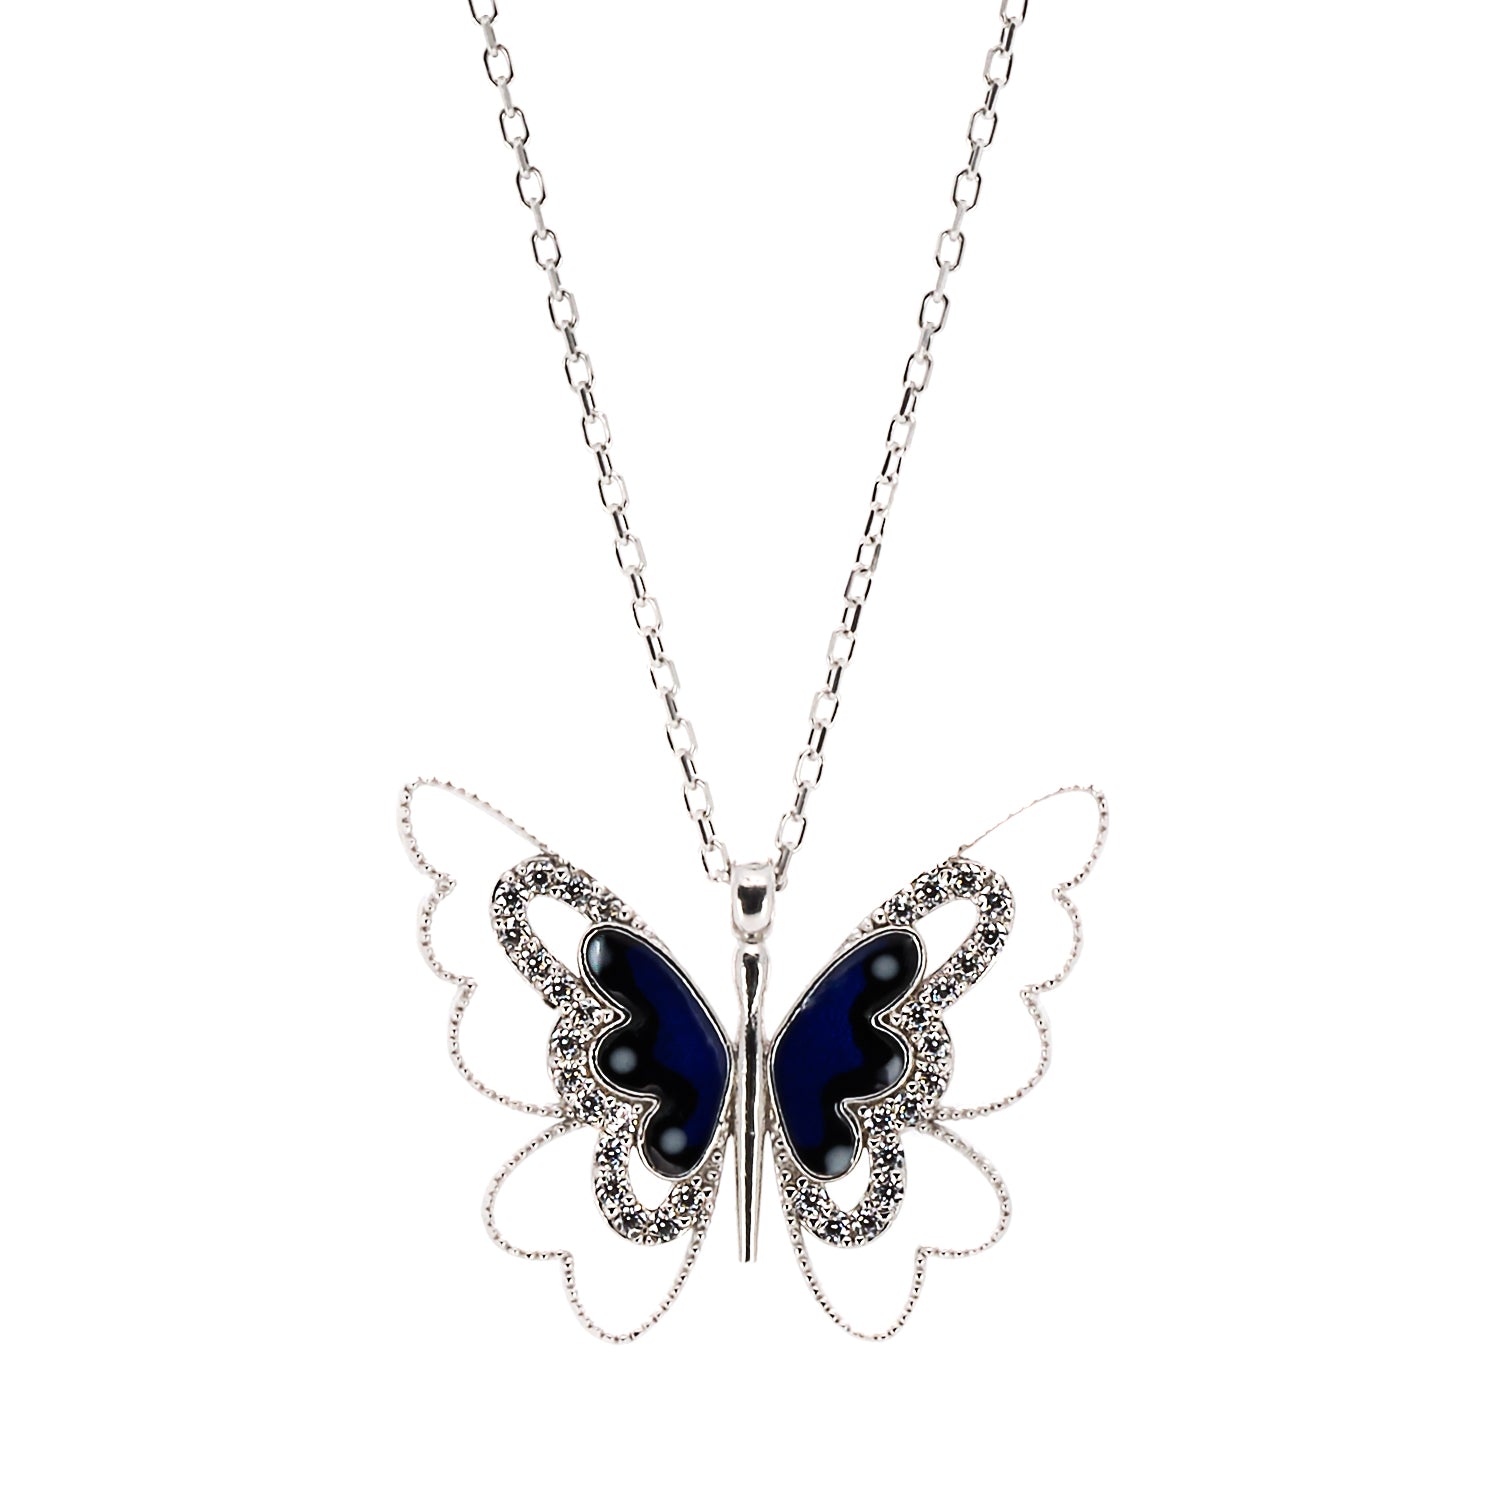 Spiritual Transformation Blue Butterfly Necklace featuring a stunning butterfly pendant crafted with 925 sterling silver and adorned with blue enamel and sparkling zirconia stones.